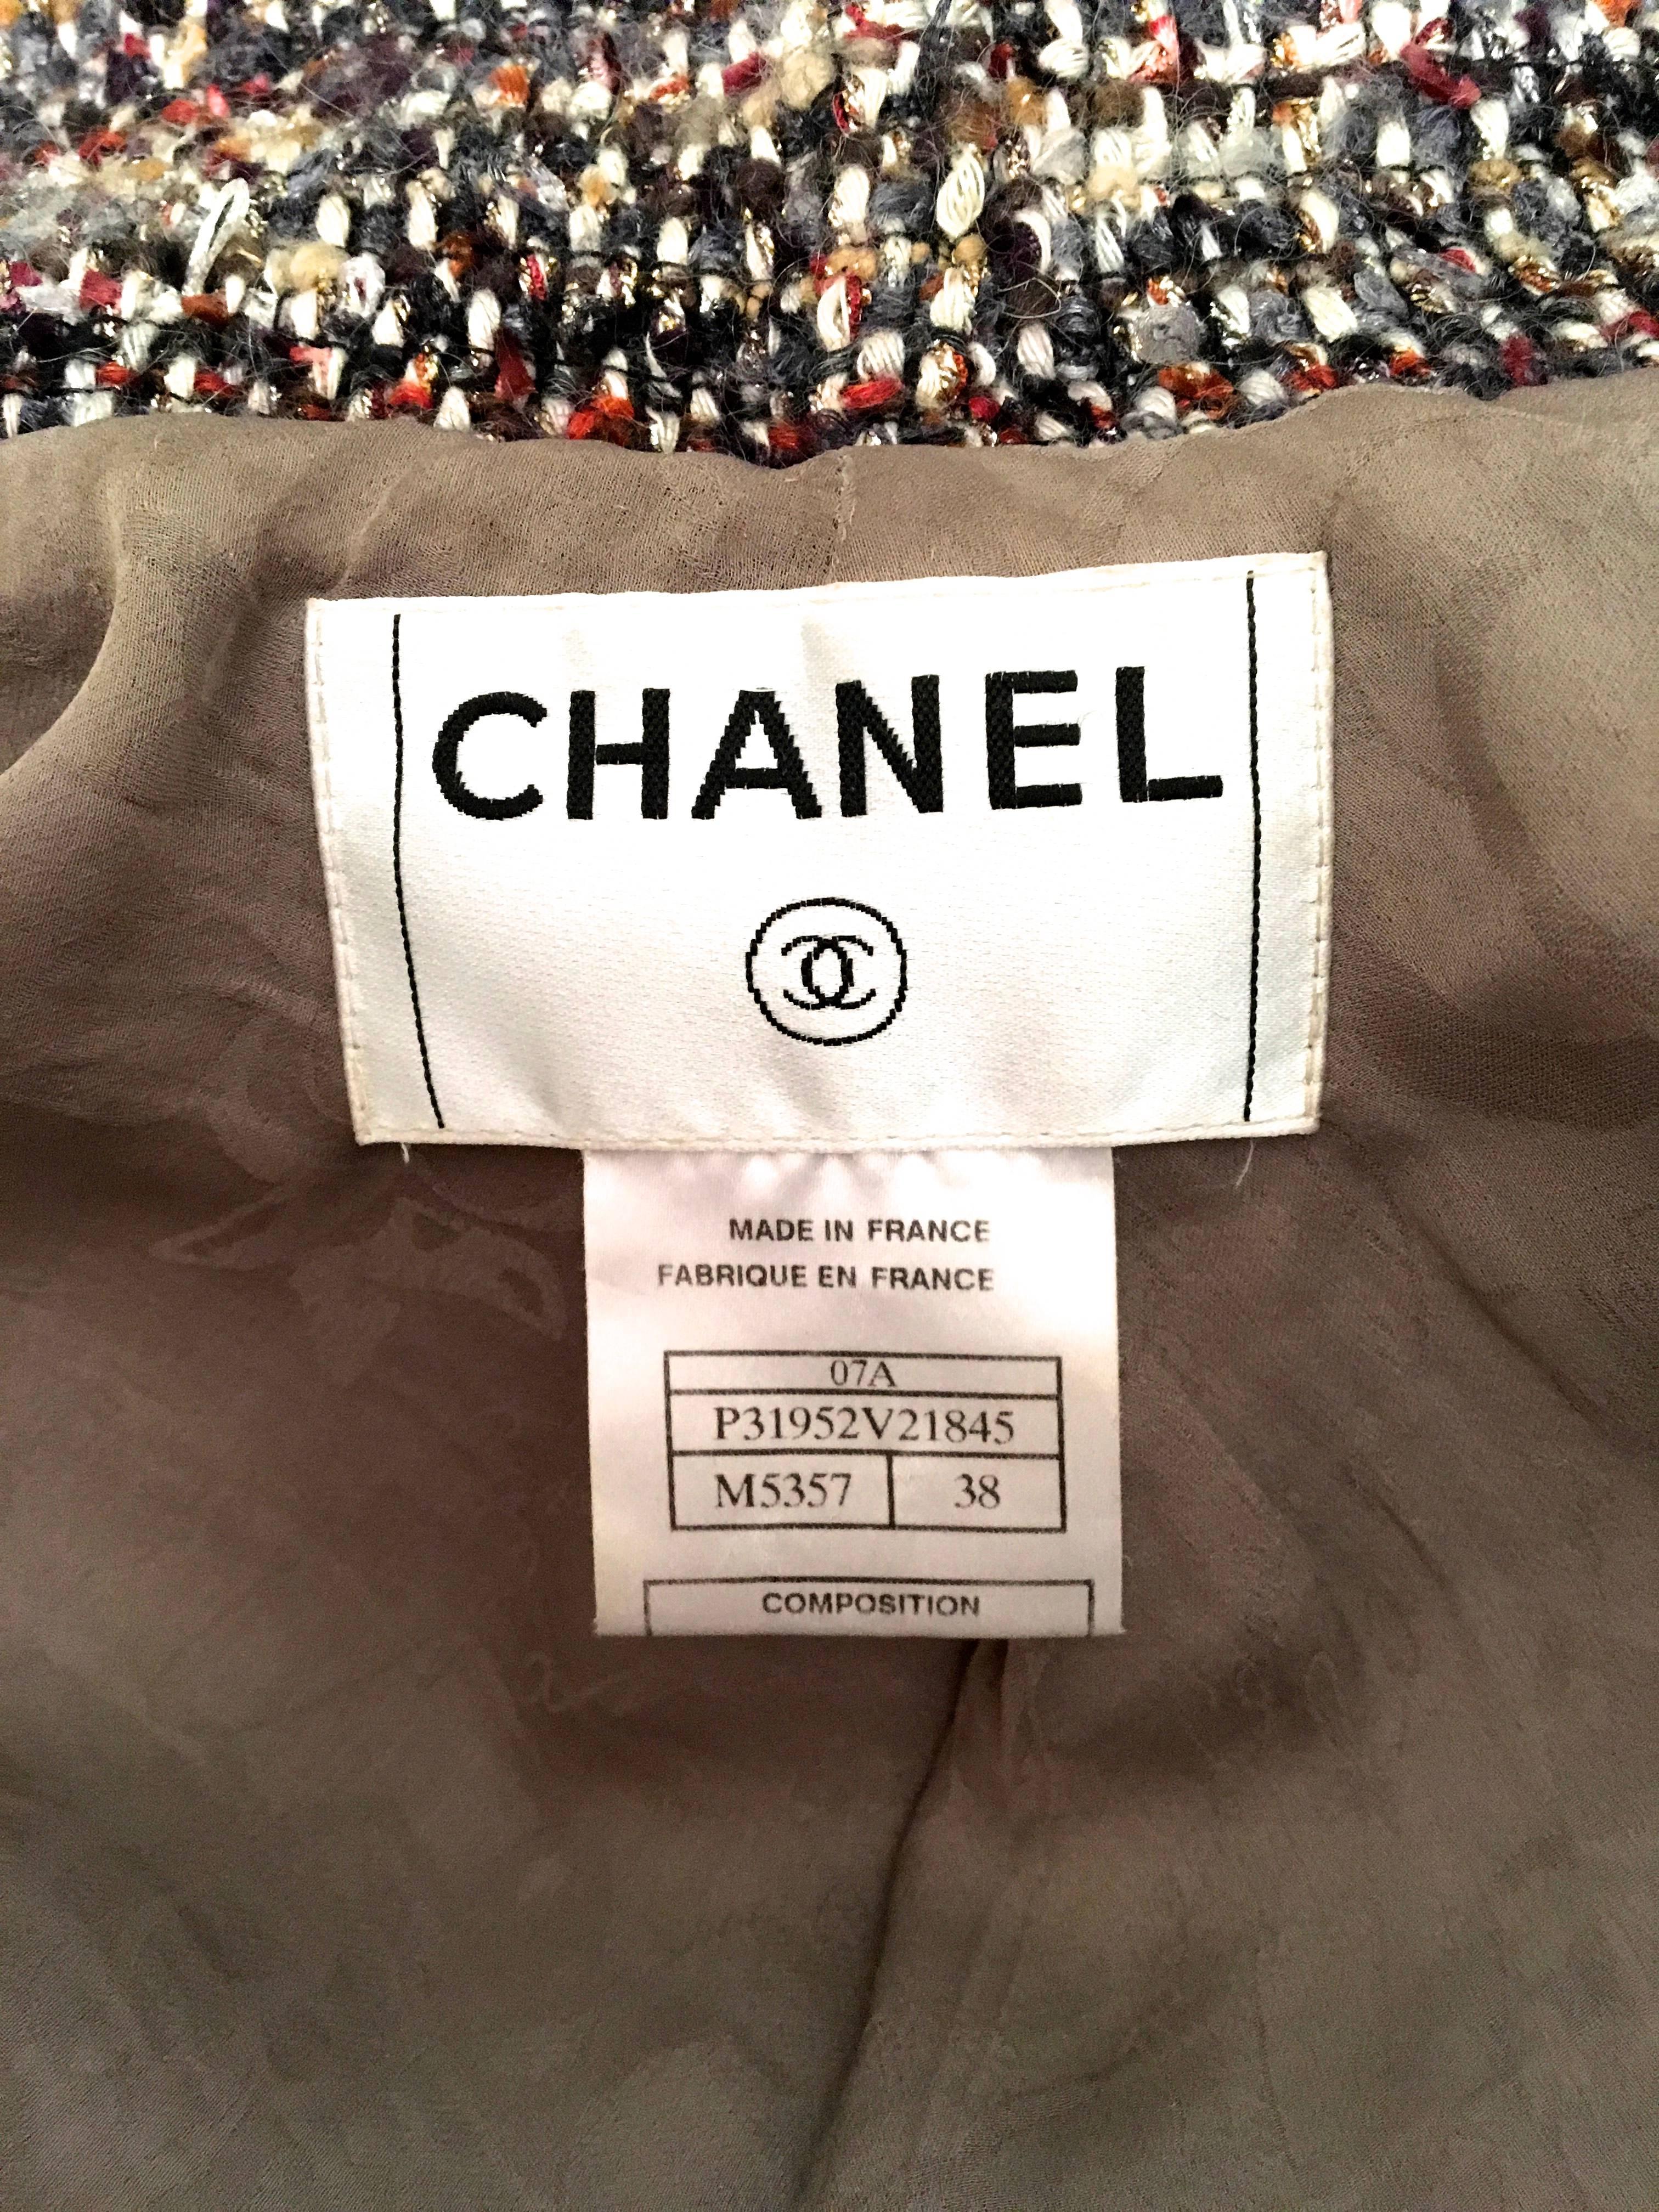  Chanel Jacket - Boucle - Fall Colors - Silver Tone Fabric 1